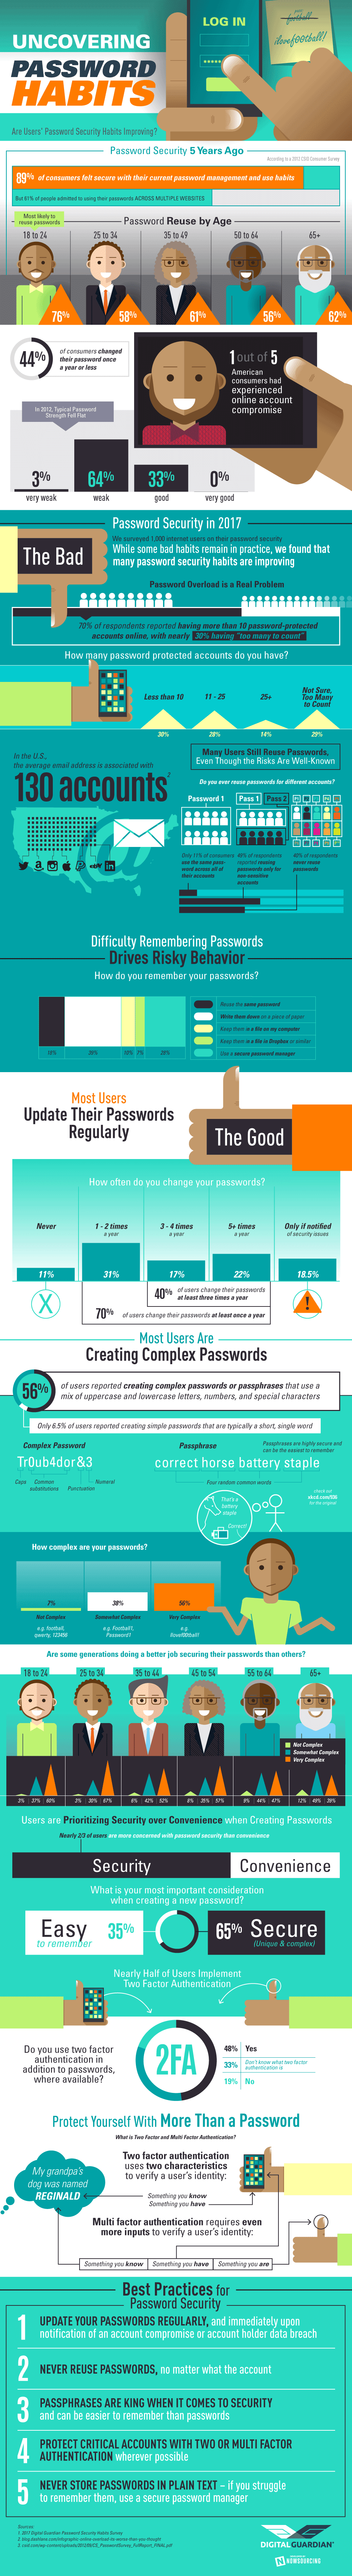 Uncovering Password Habits: Are Users’ Password Security Habits Improving? - #Infographic